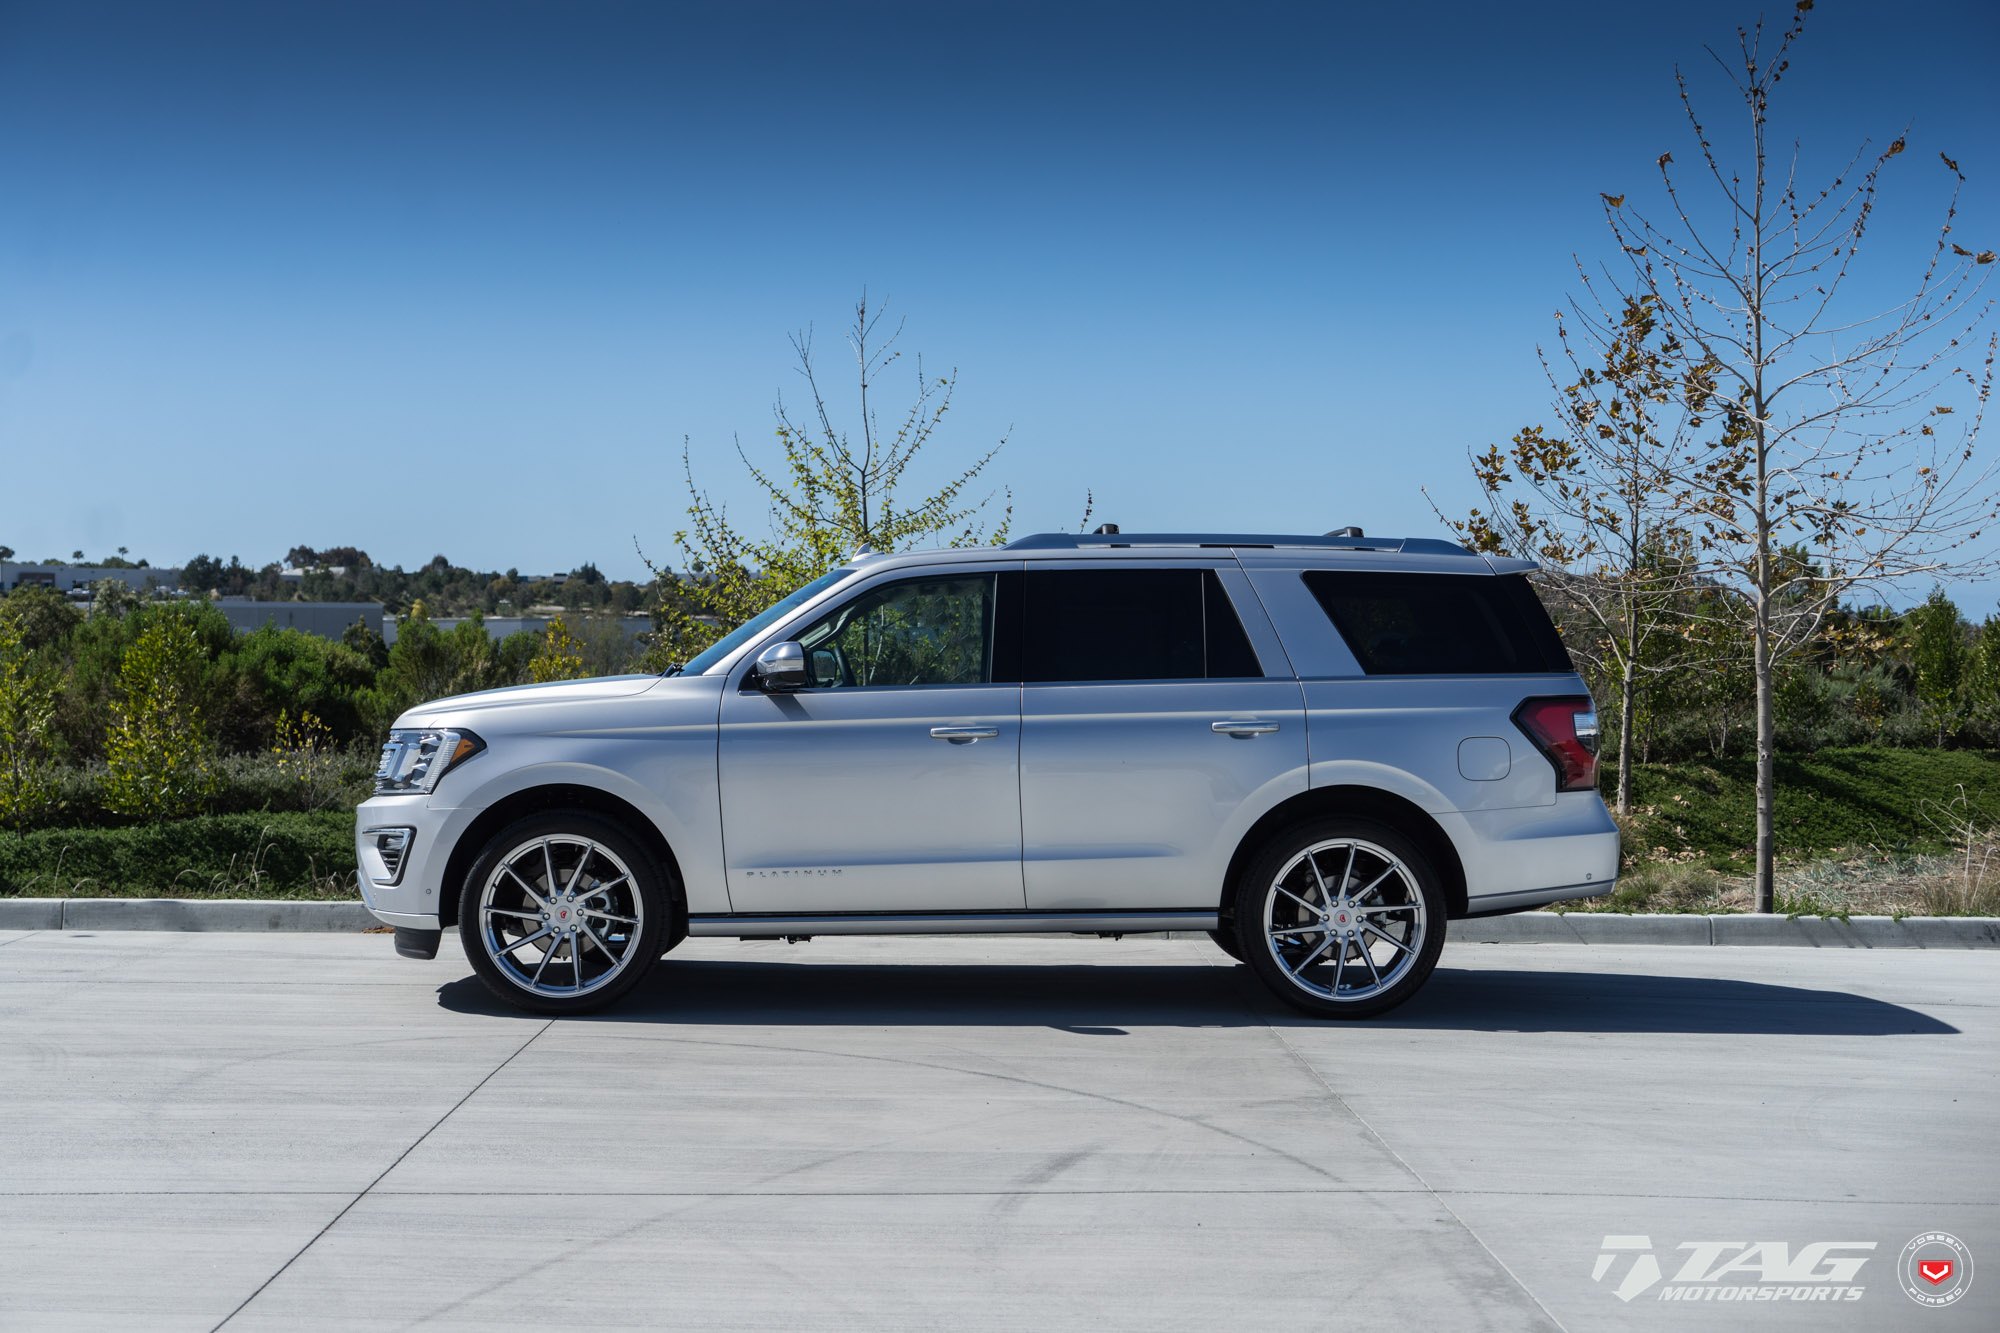 Chrome Forged Vossen Rims on Silver Ford Expedition - Photo by Vossen